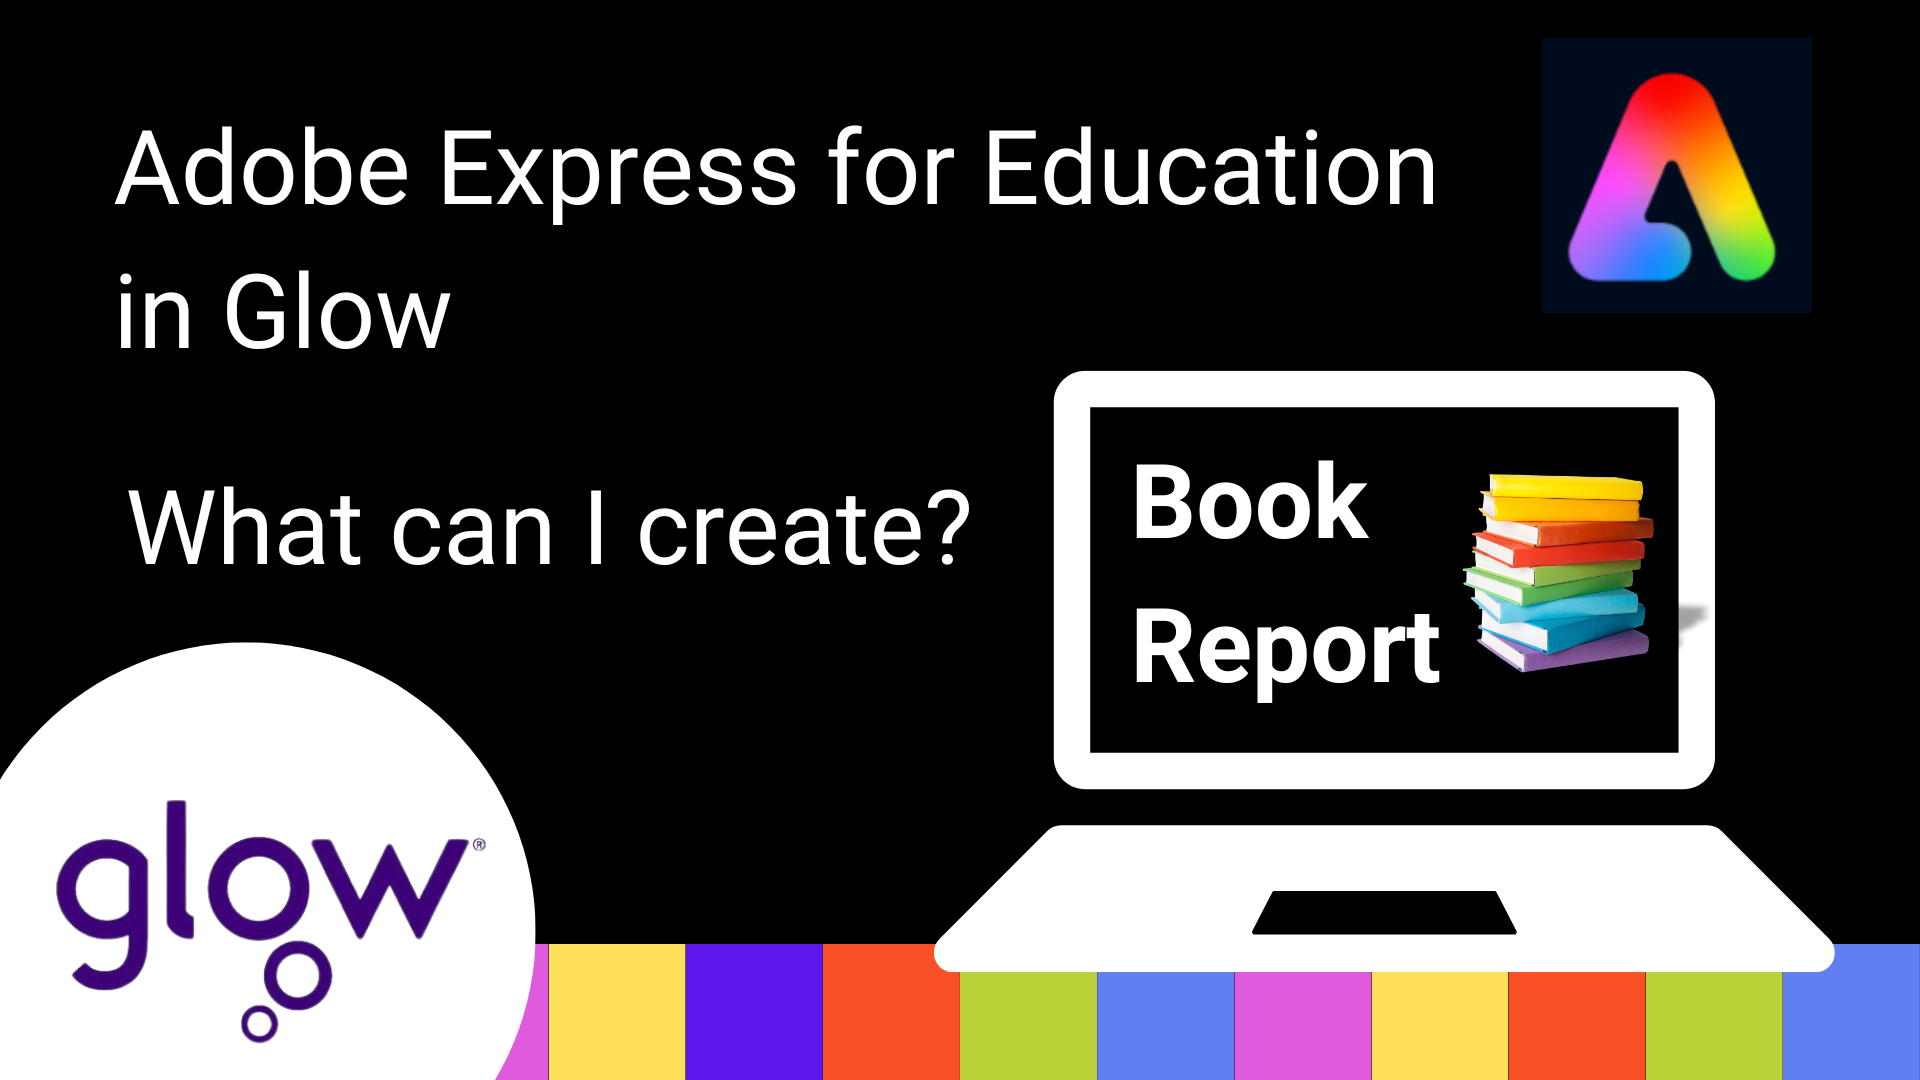 Adobe Express for Education in glow graphic. What can I create? Book Report